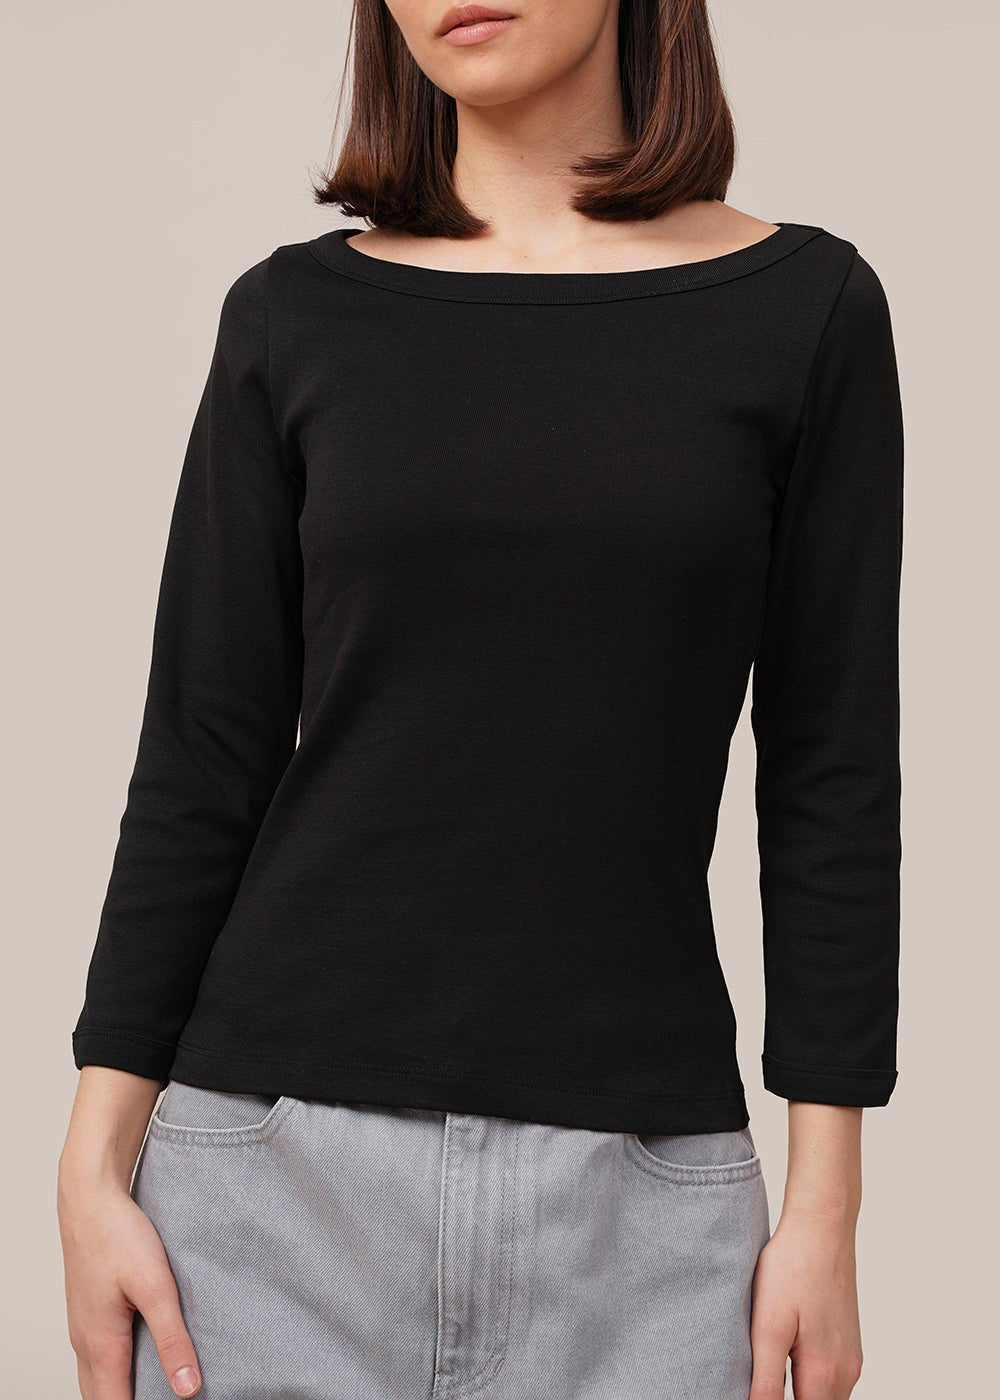 FLORE FLORE Black Steffi Tee - New Classics Studios Sustainable Ethical Fashion Canada